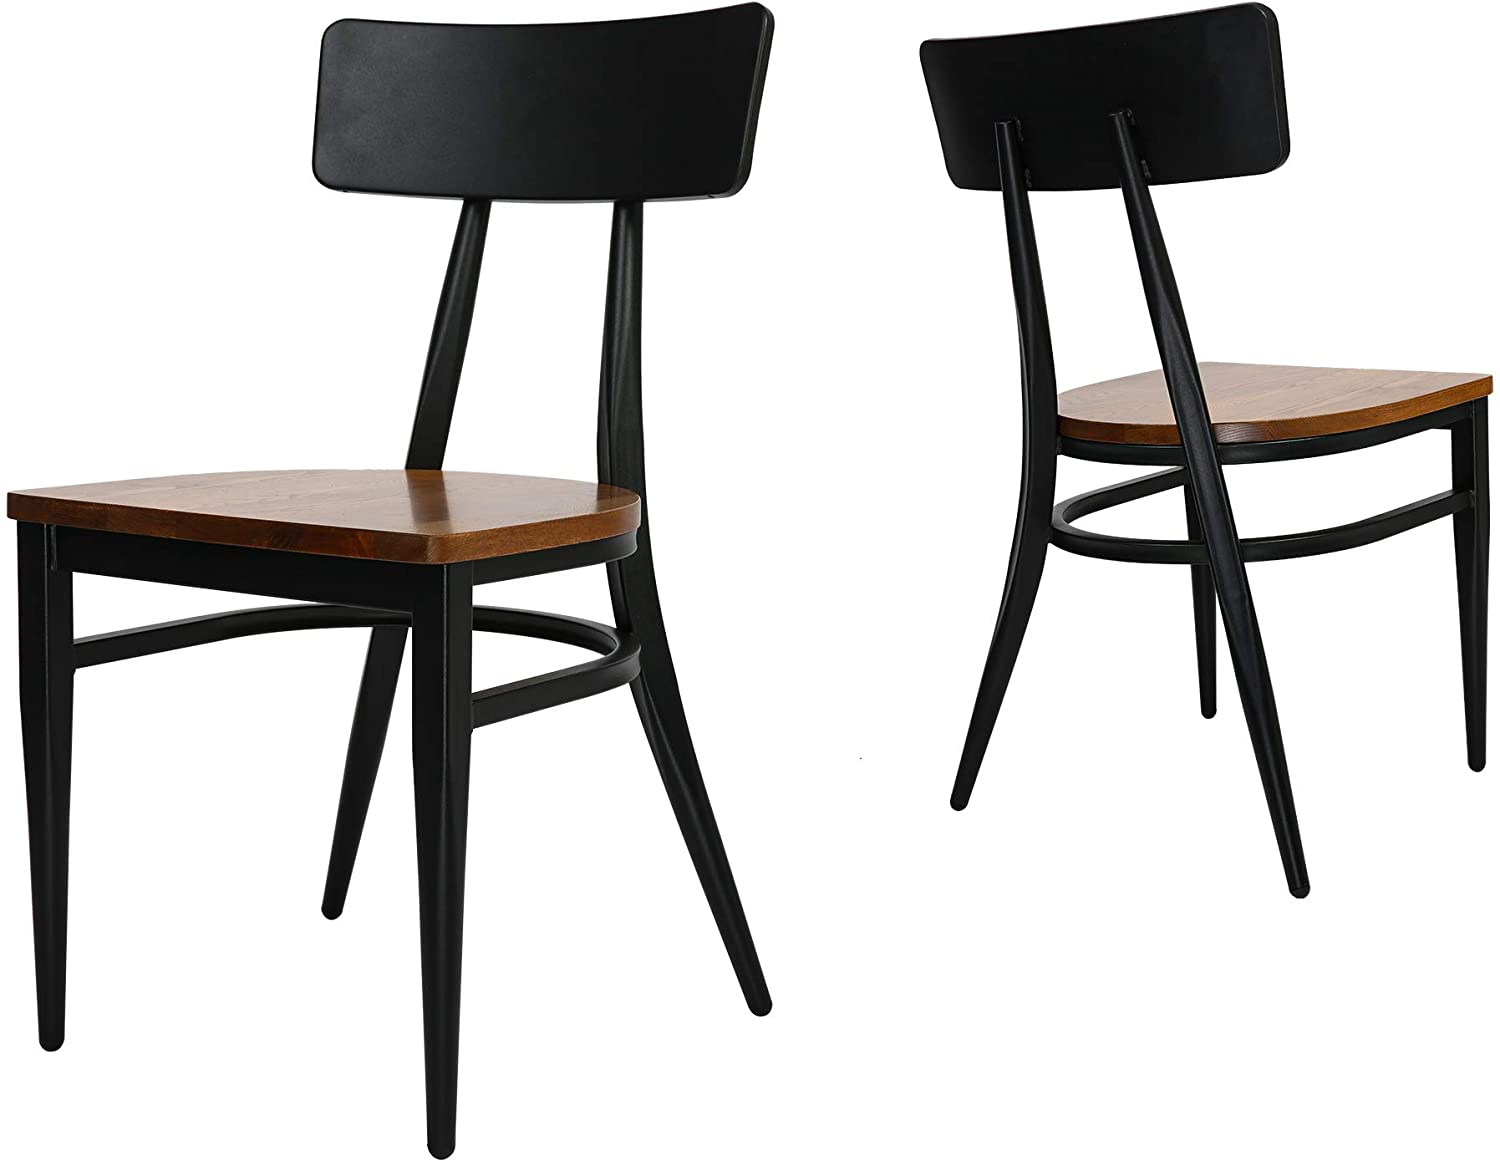 Set of 2 Kitchen Dining Chairs Wood Seat with Simple Back Metal Legs, π Back Black